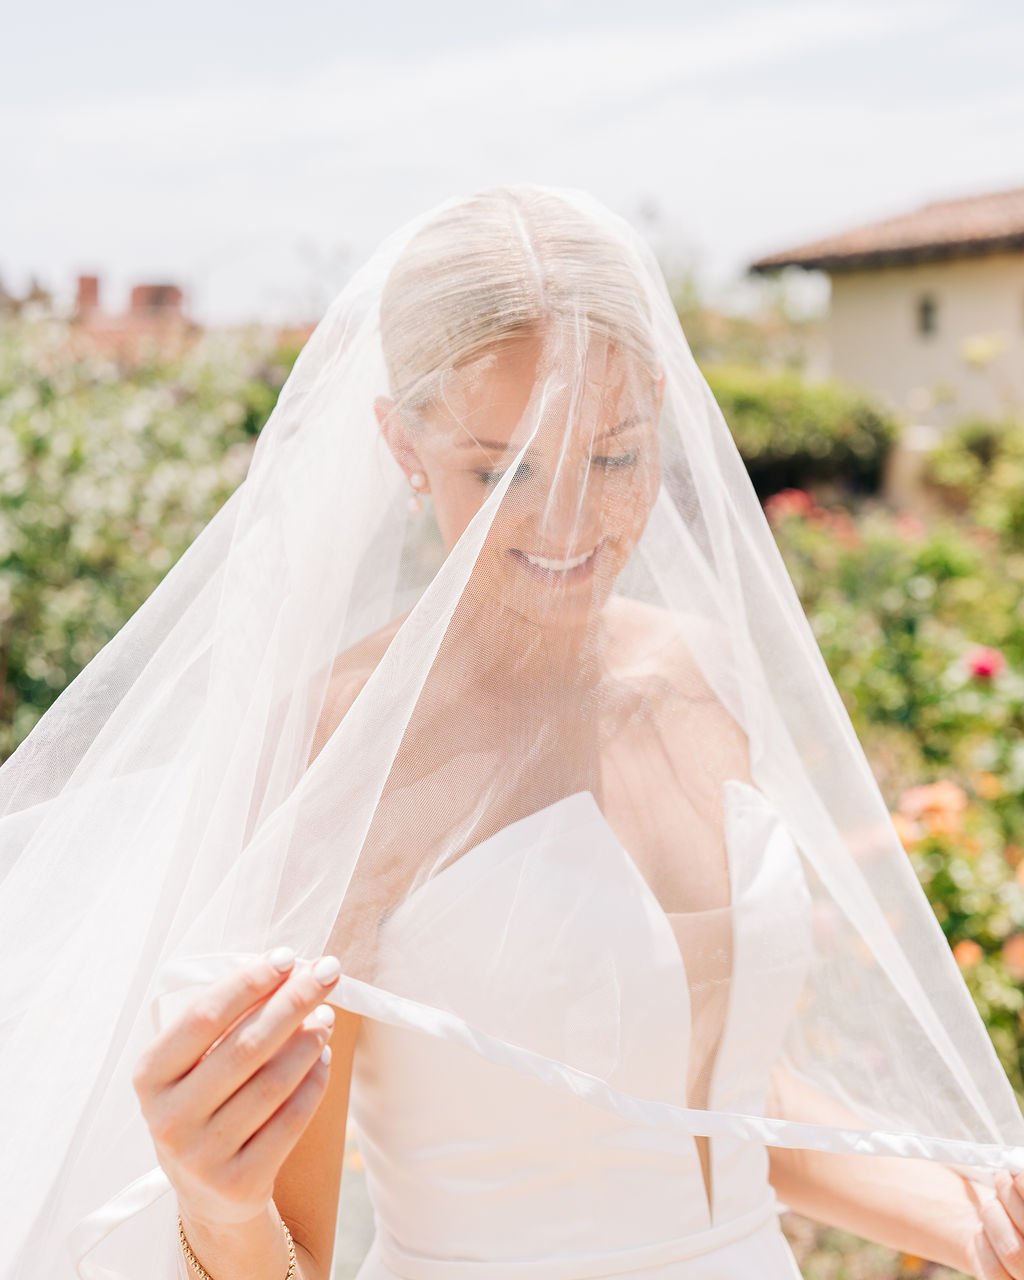 tuscan-wedding-at-serra-plaza-photographed-by-the-villar-photo-co, wedding-planning-by-bring-the-bubbly-events, florals-by-beautiful-savage-flowers